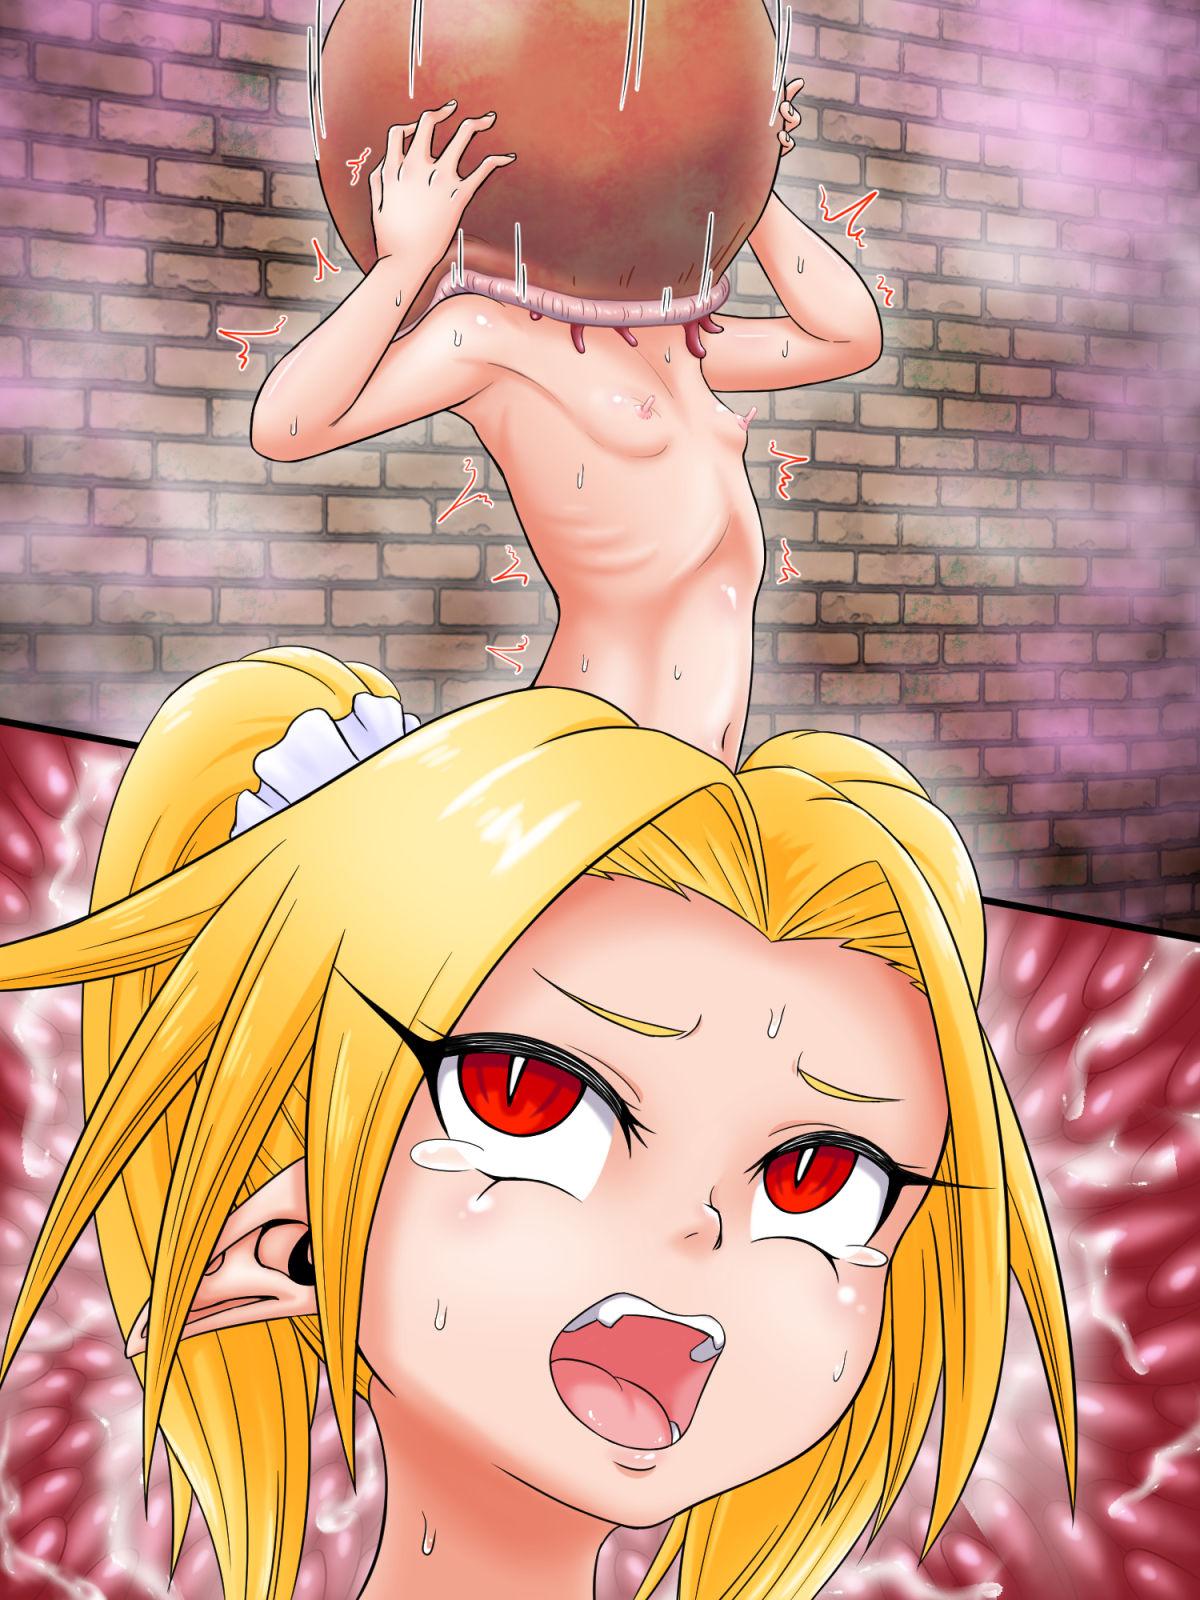 Marilyn VS eroticism trap dungeon 86